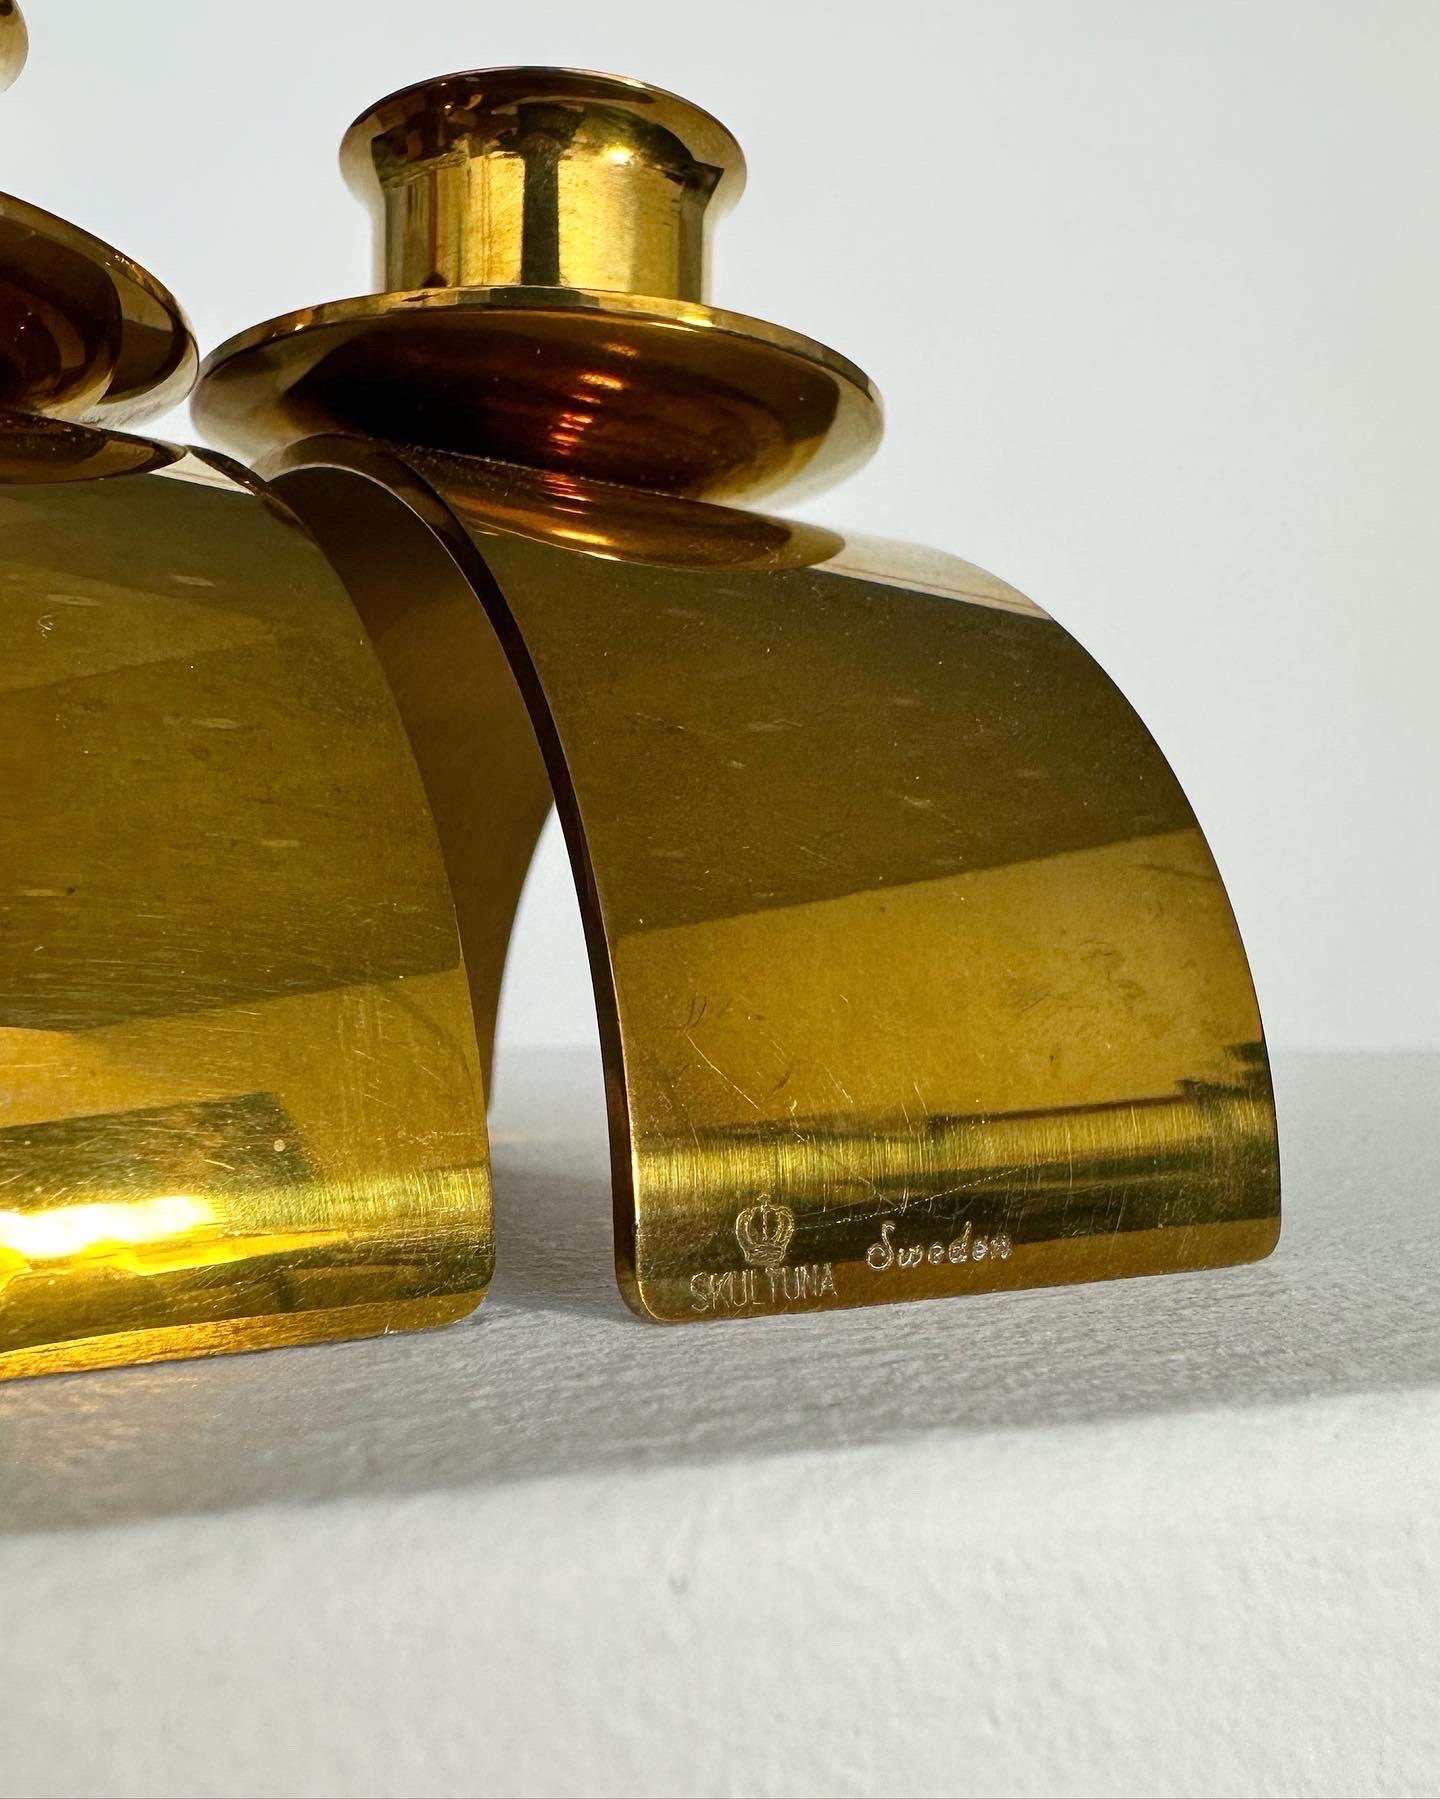 Pair of Gunnar Nylund Candle Holders Skultuna Brass Sweden, 1994 For Sale 1